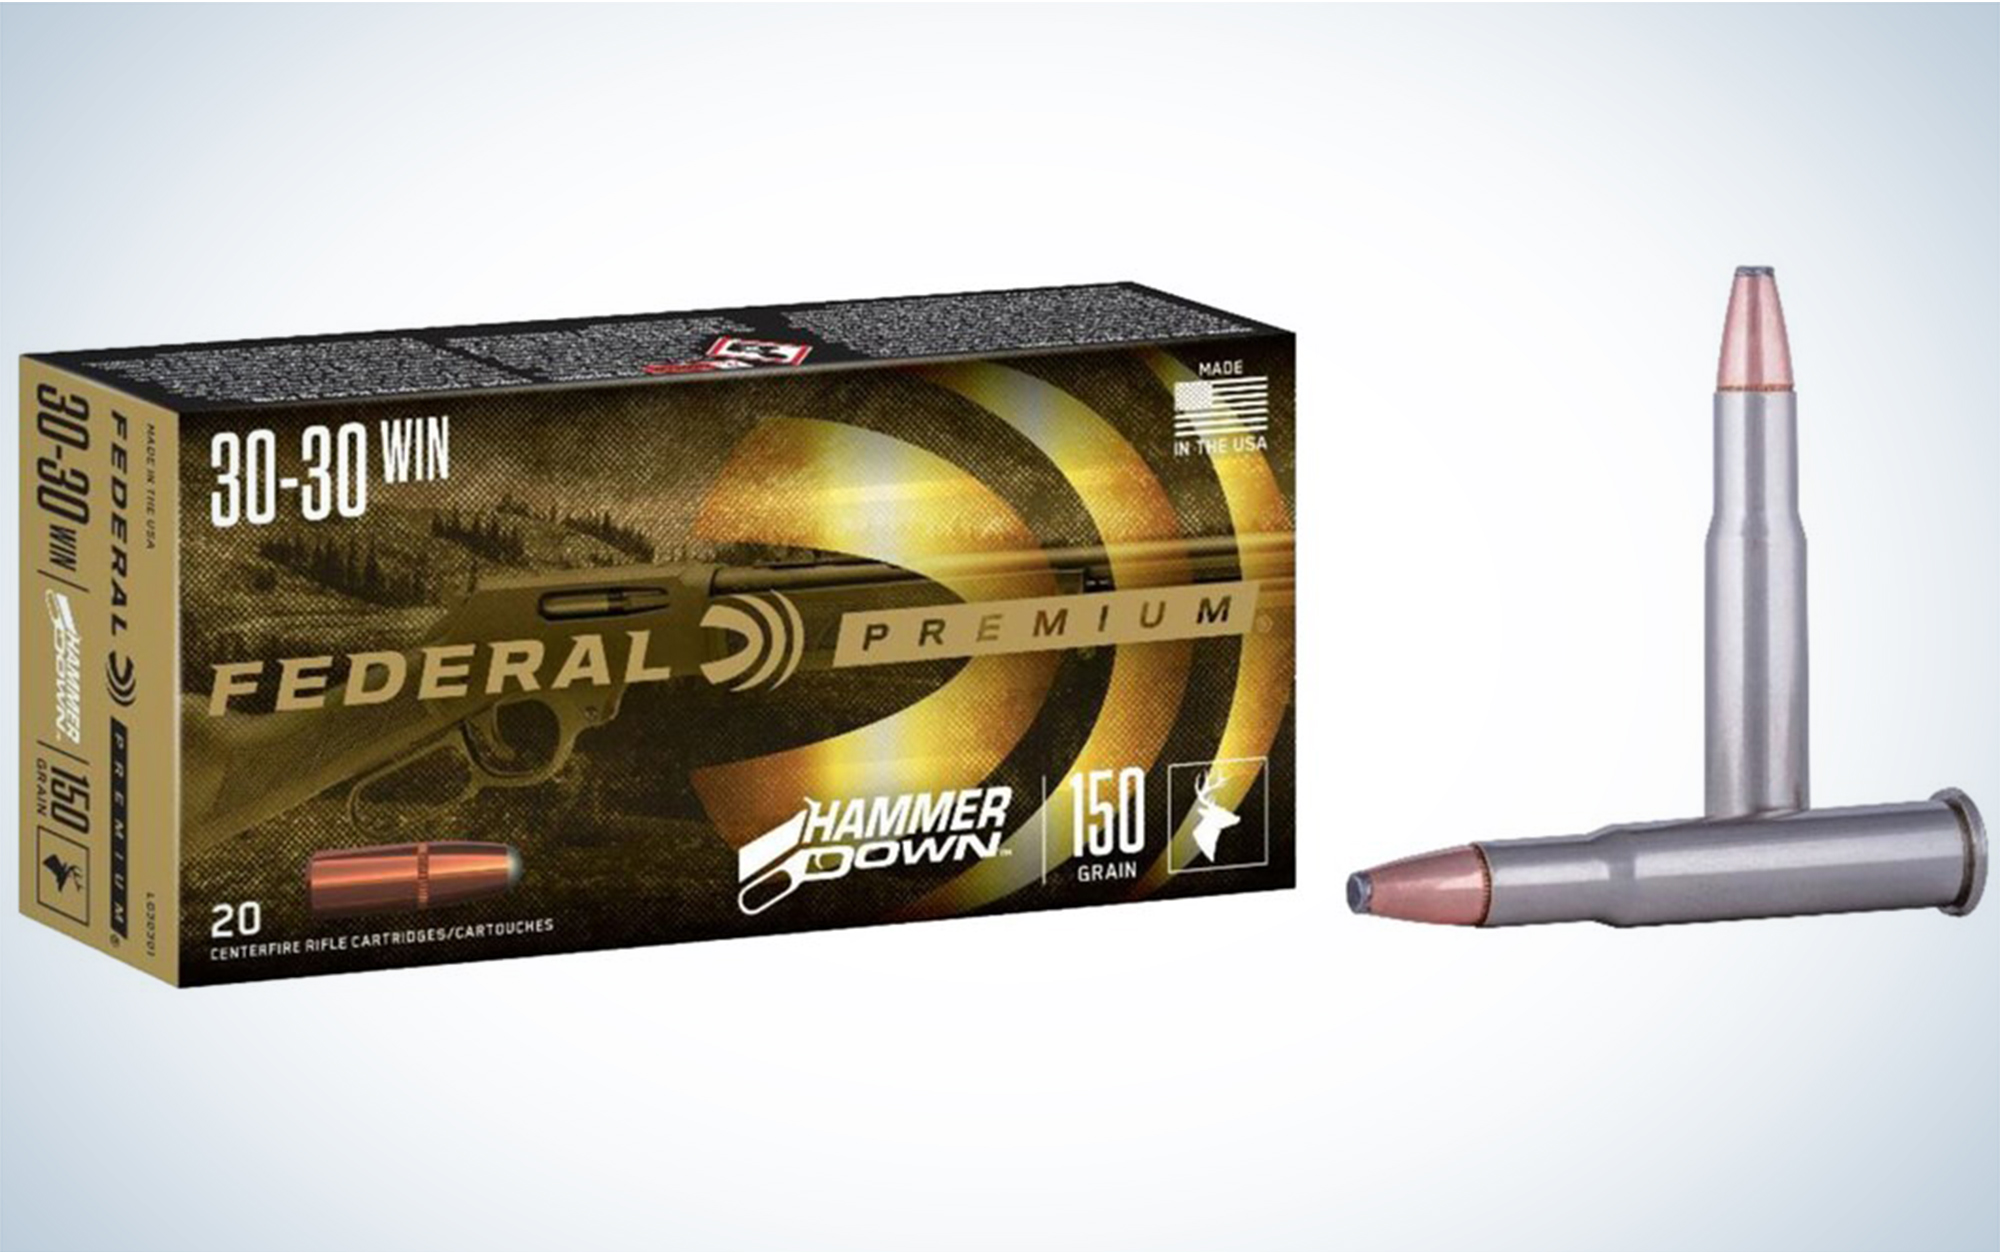 Federal HammerDown is one of the best .30-.30 ammunitions.